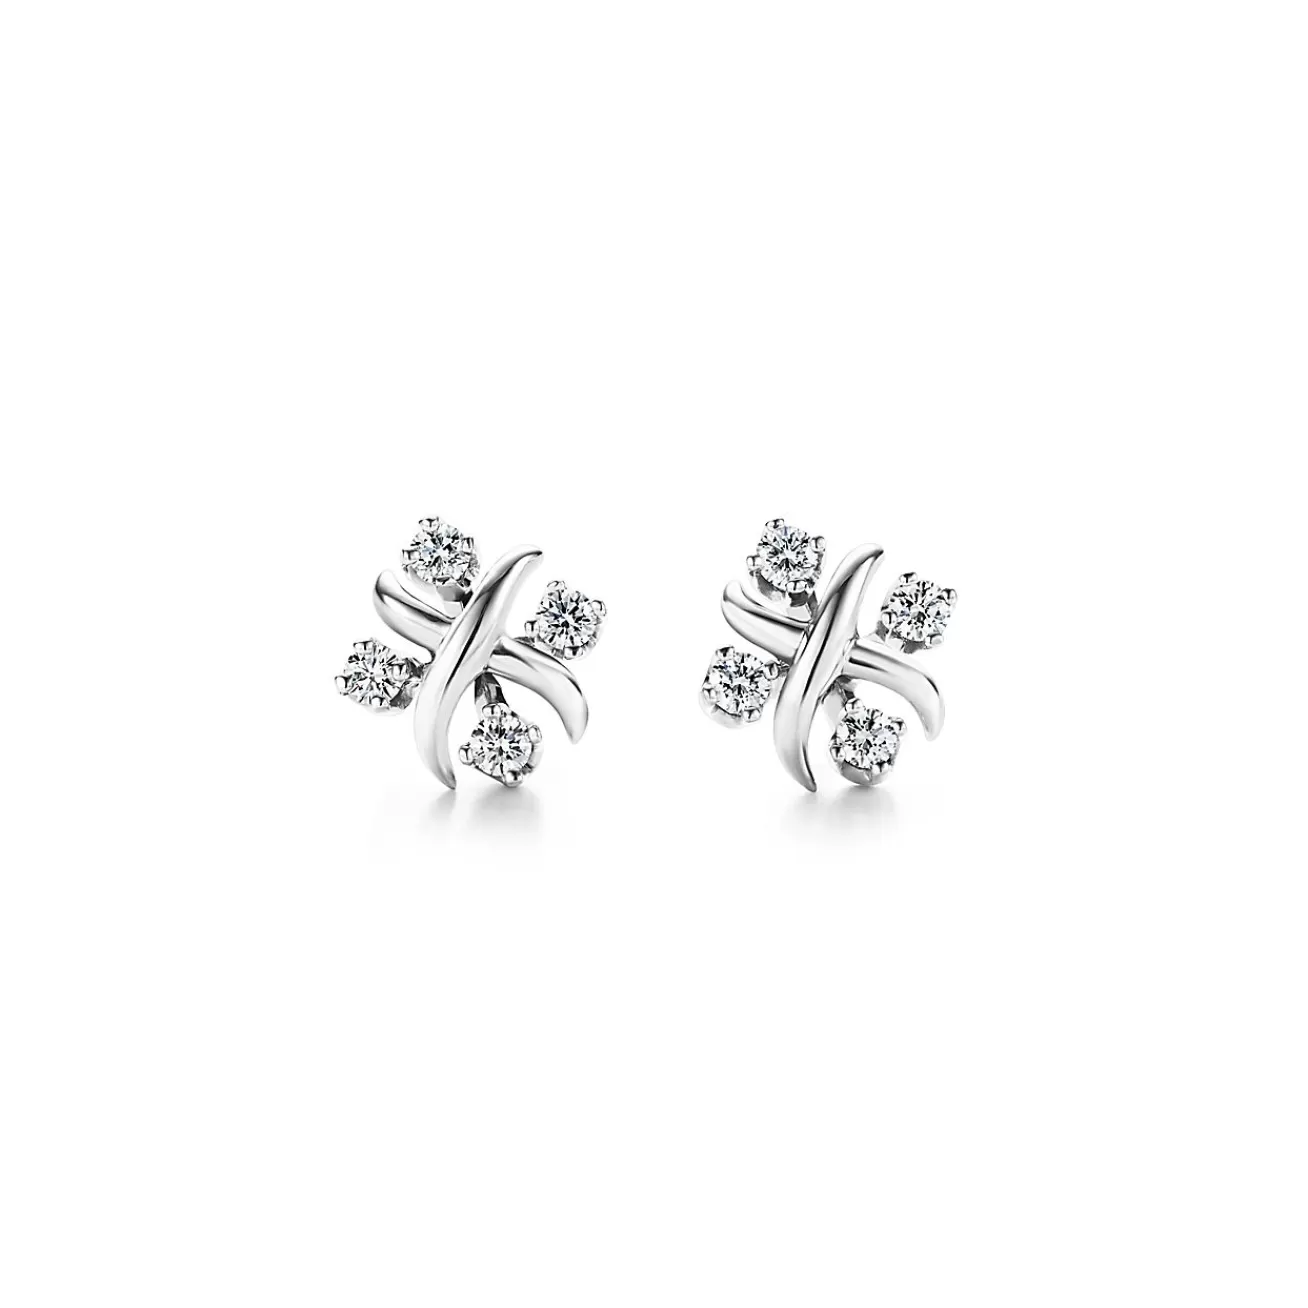 Tiffany & Co. Schlumberger® Lynn earrings in platinum with diamonds. | ^ Earrings | Gifts for Her